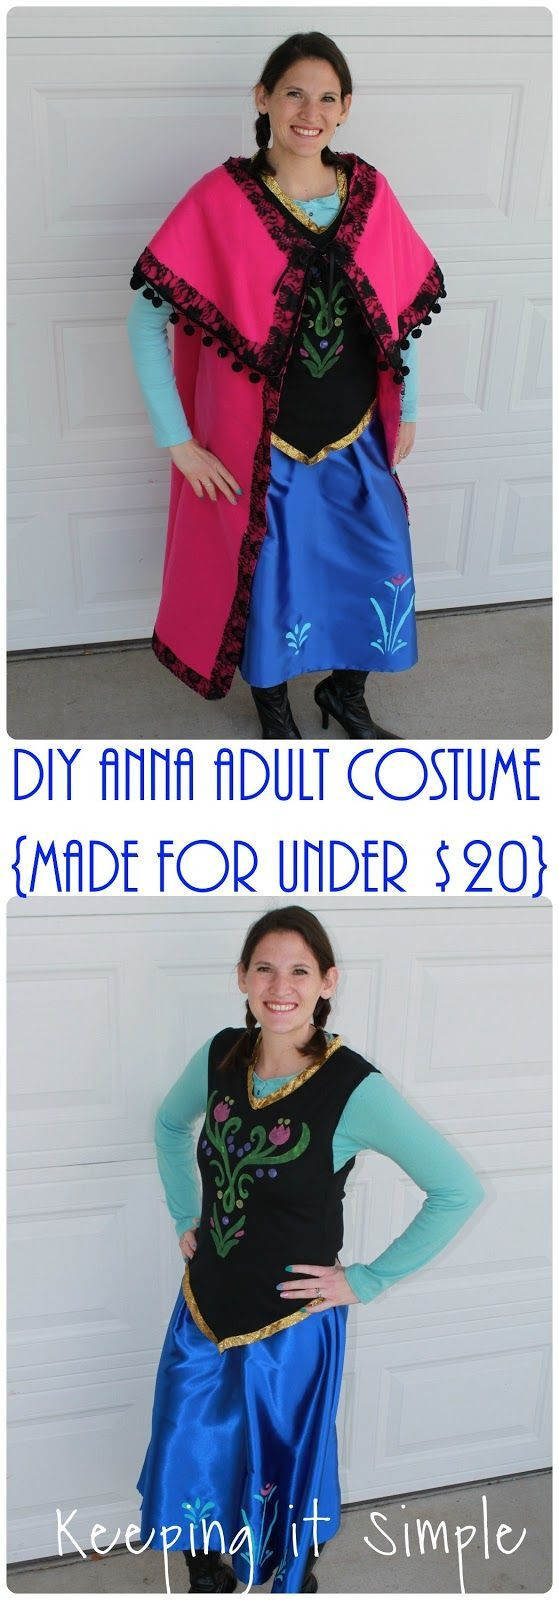 DIY Disney Costumes For Adults
 25 best ideas about Adult Costumes on Pinterest